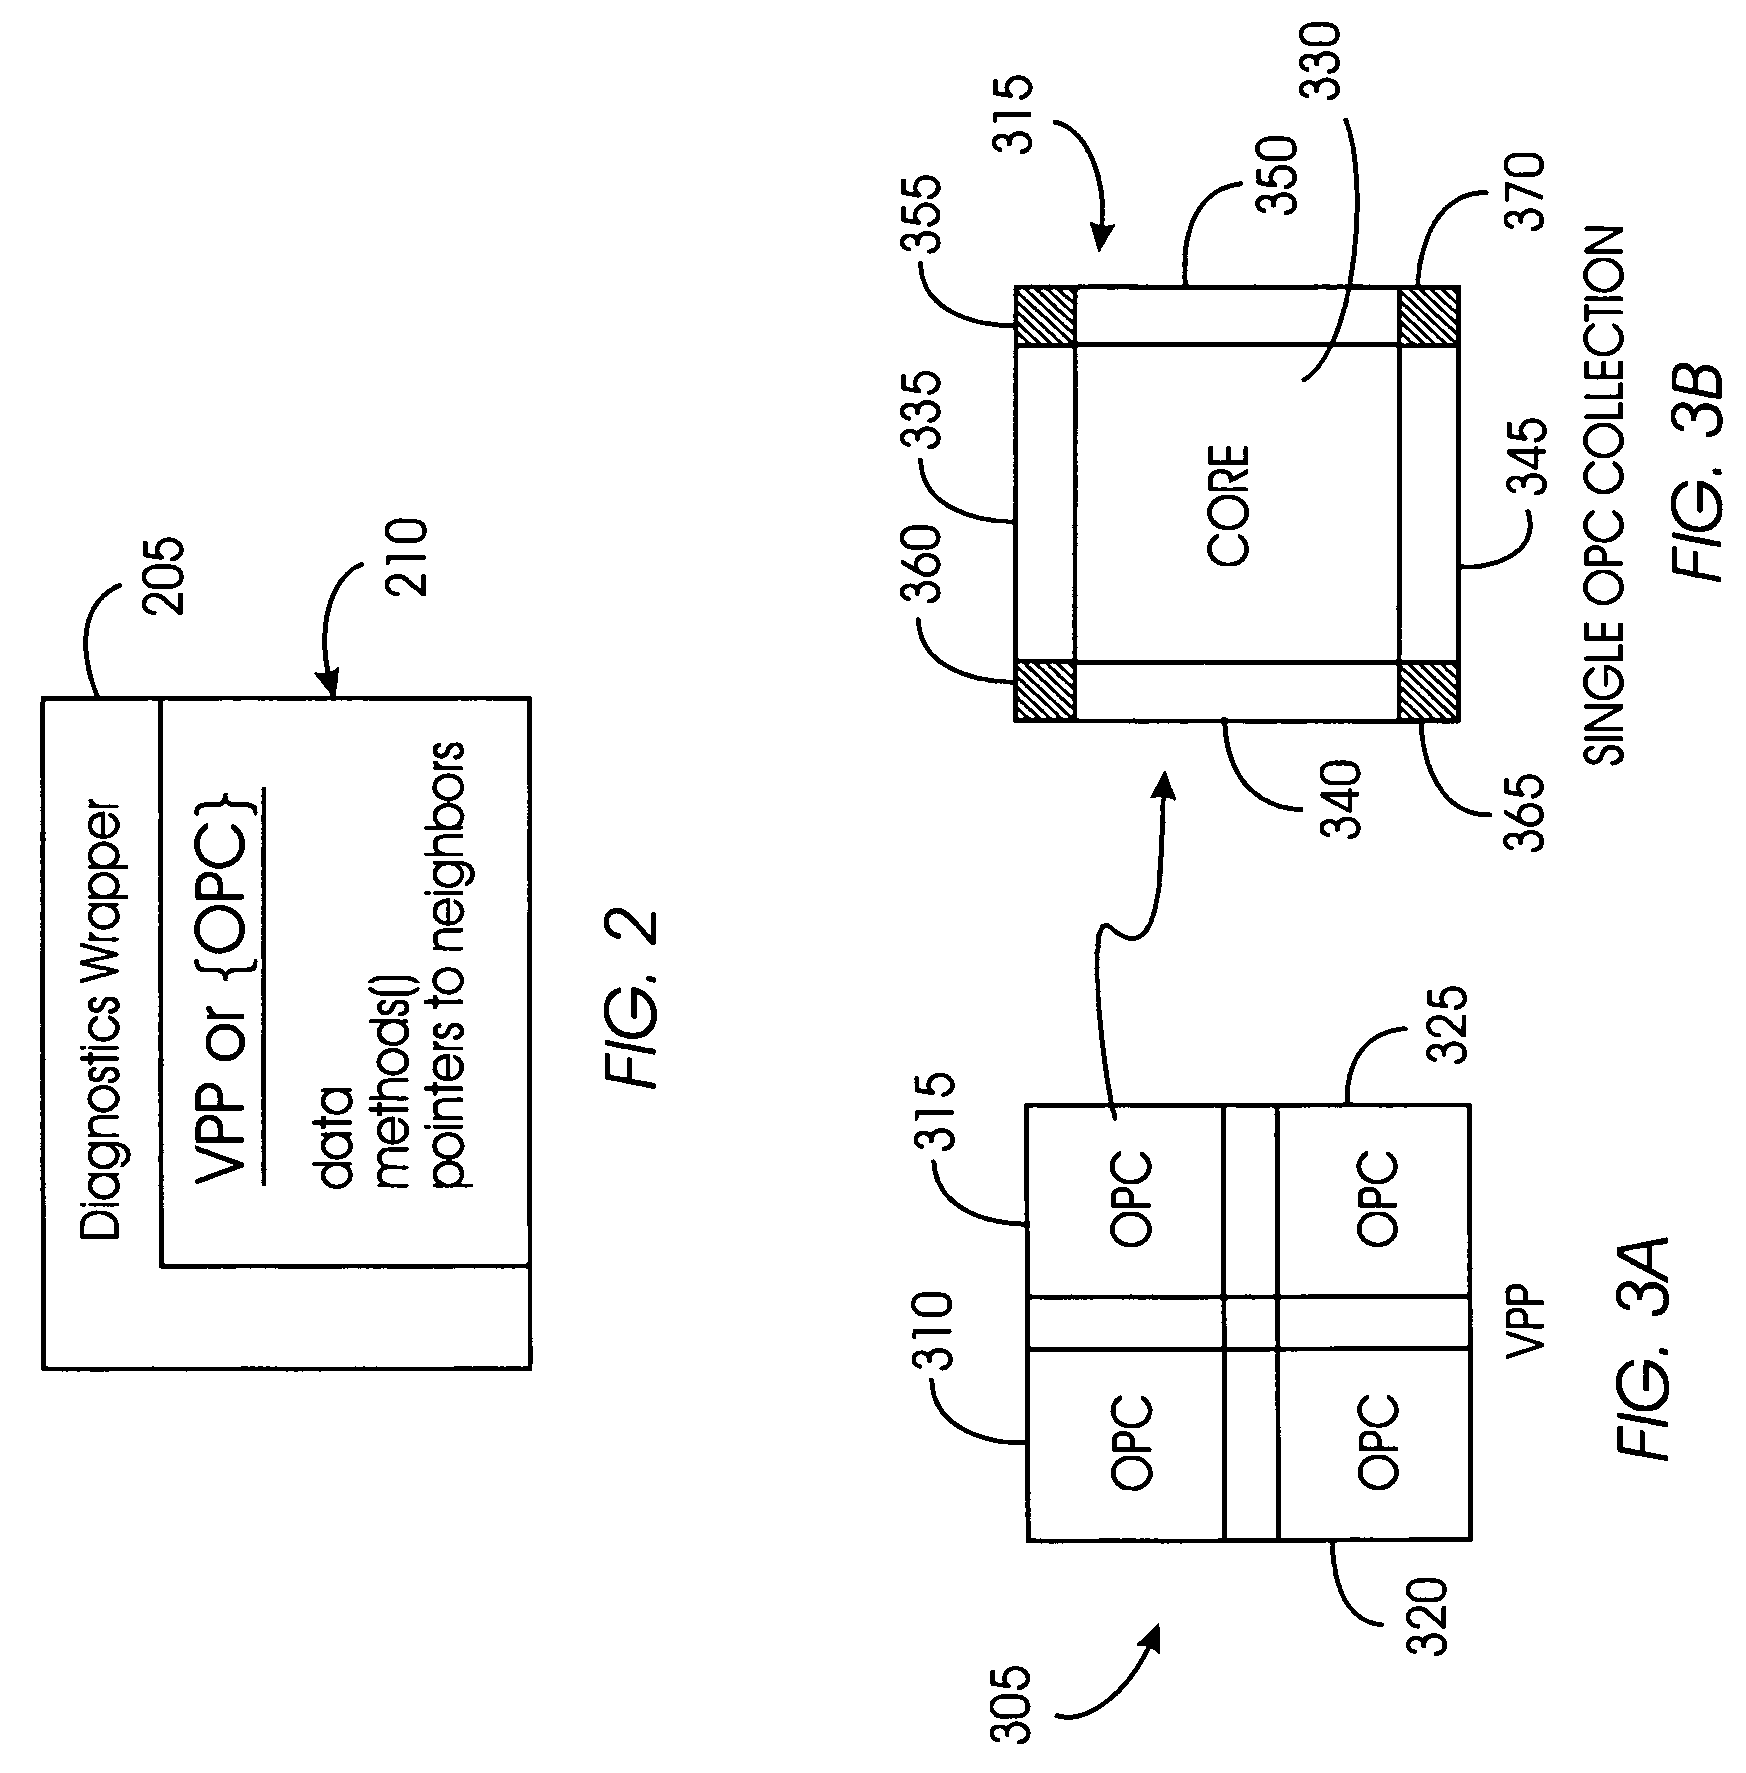 System and method for balancing a computing load among computing resources in a distributed computing problem